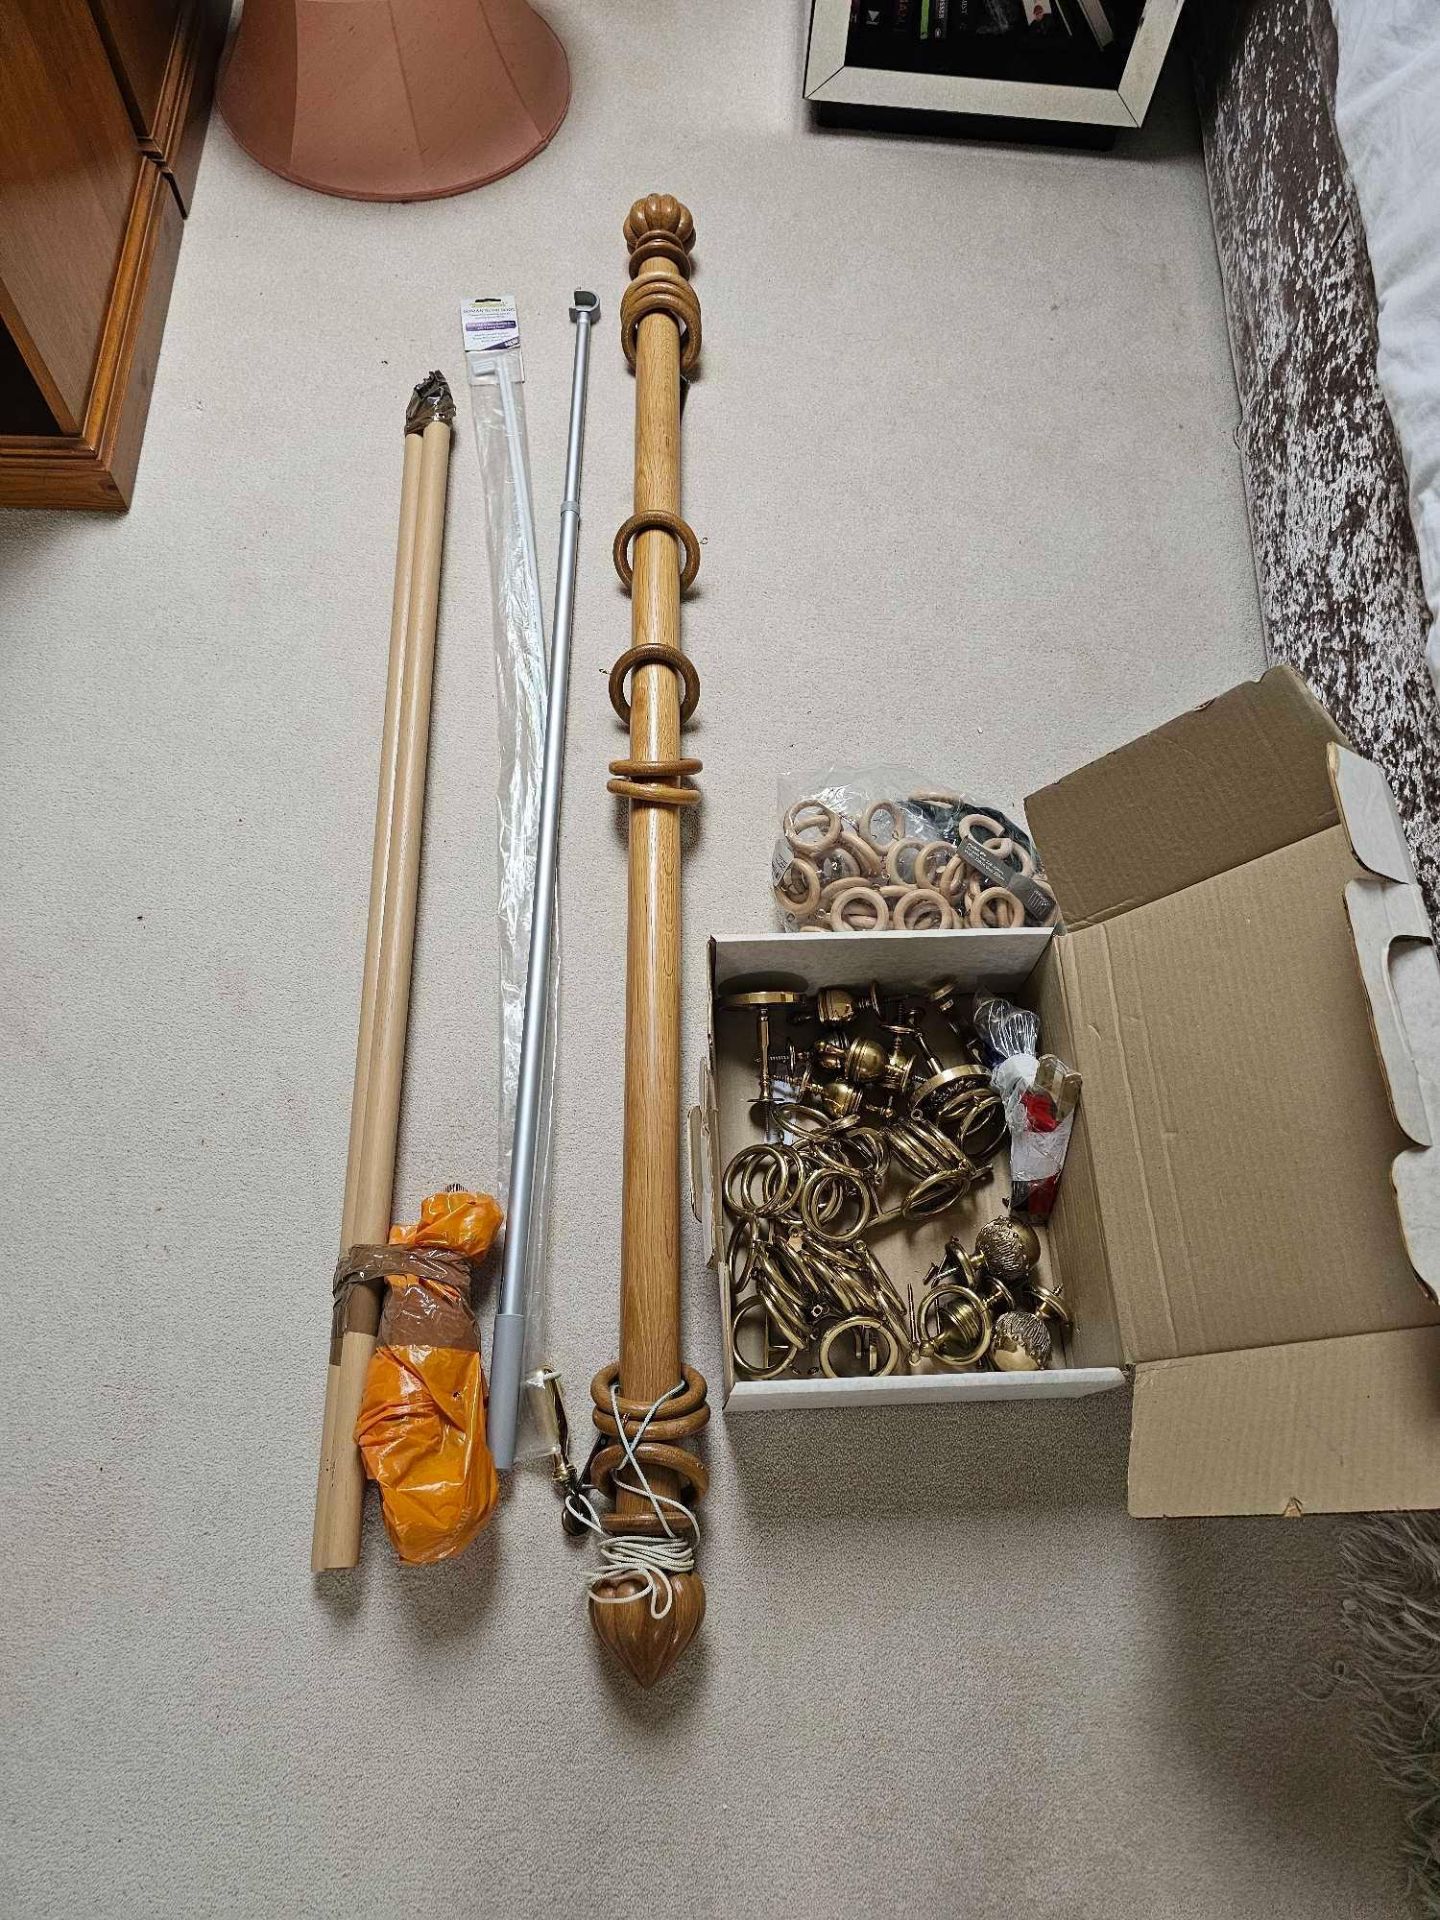 A Quantity Of Various Curtain Fittings Brass And Wood Rings, Finials And A Wooden Drapery Pole As - Image 3 of 4